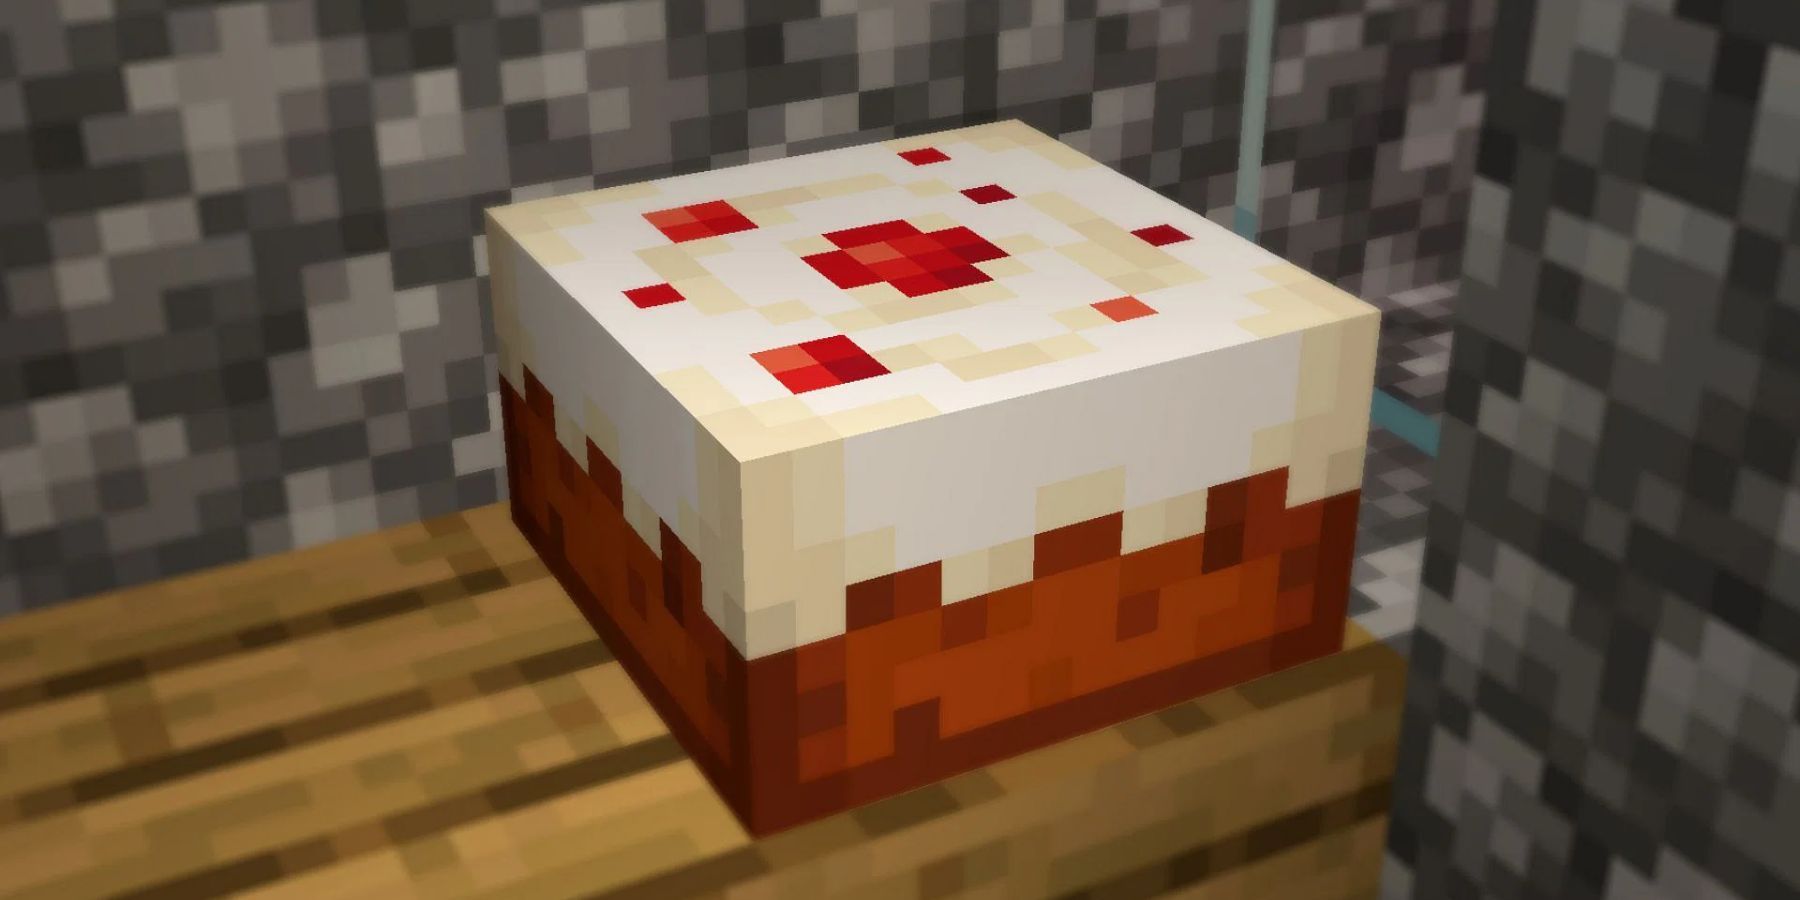 A baked cake in Minecraft